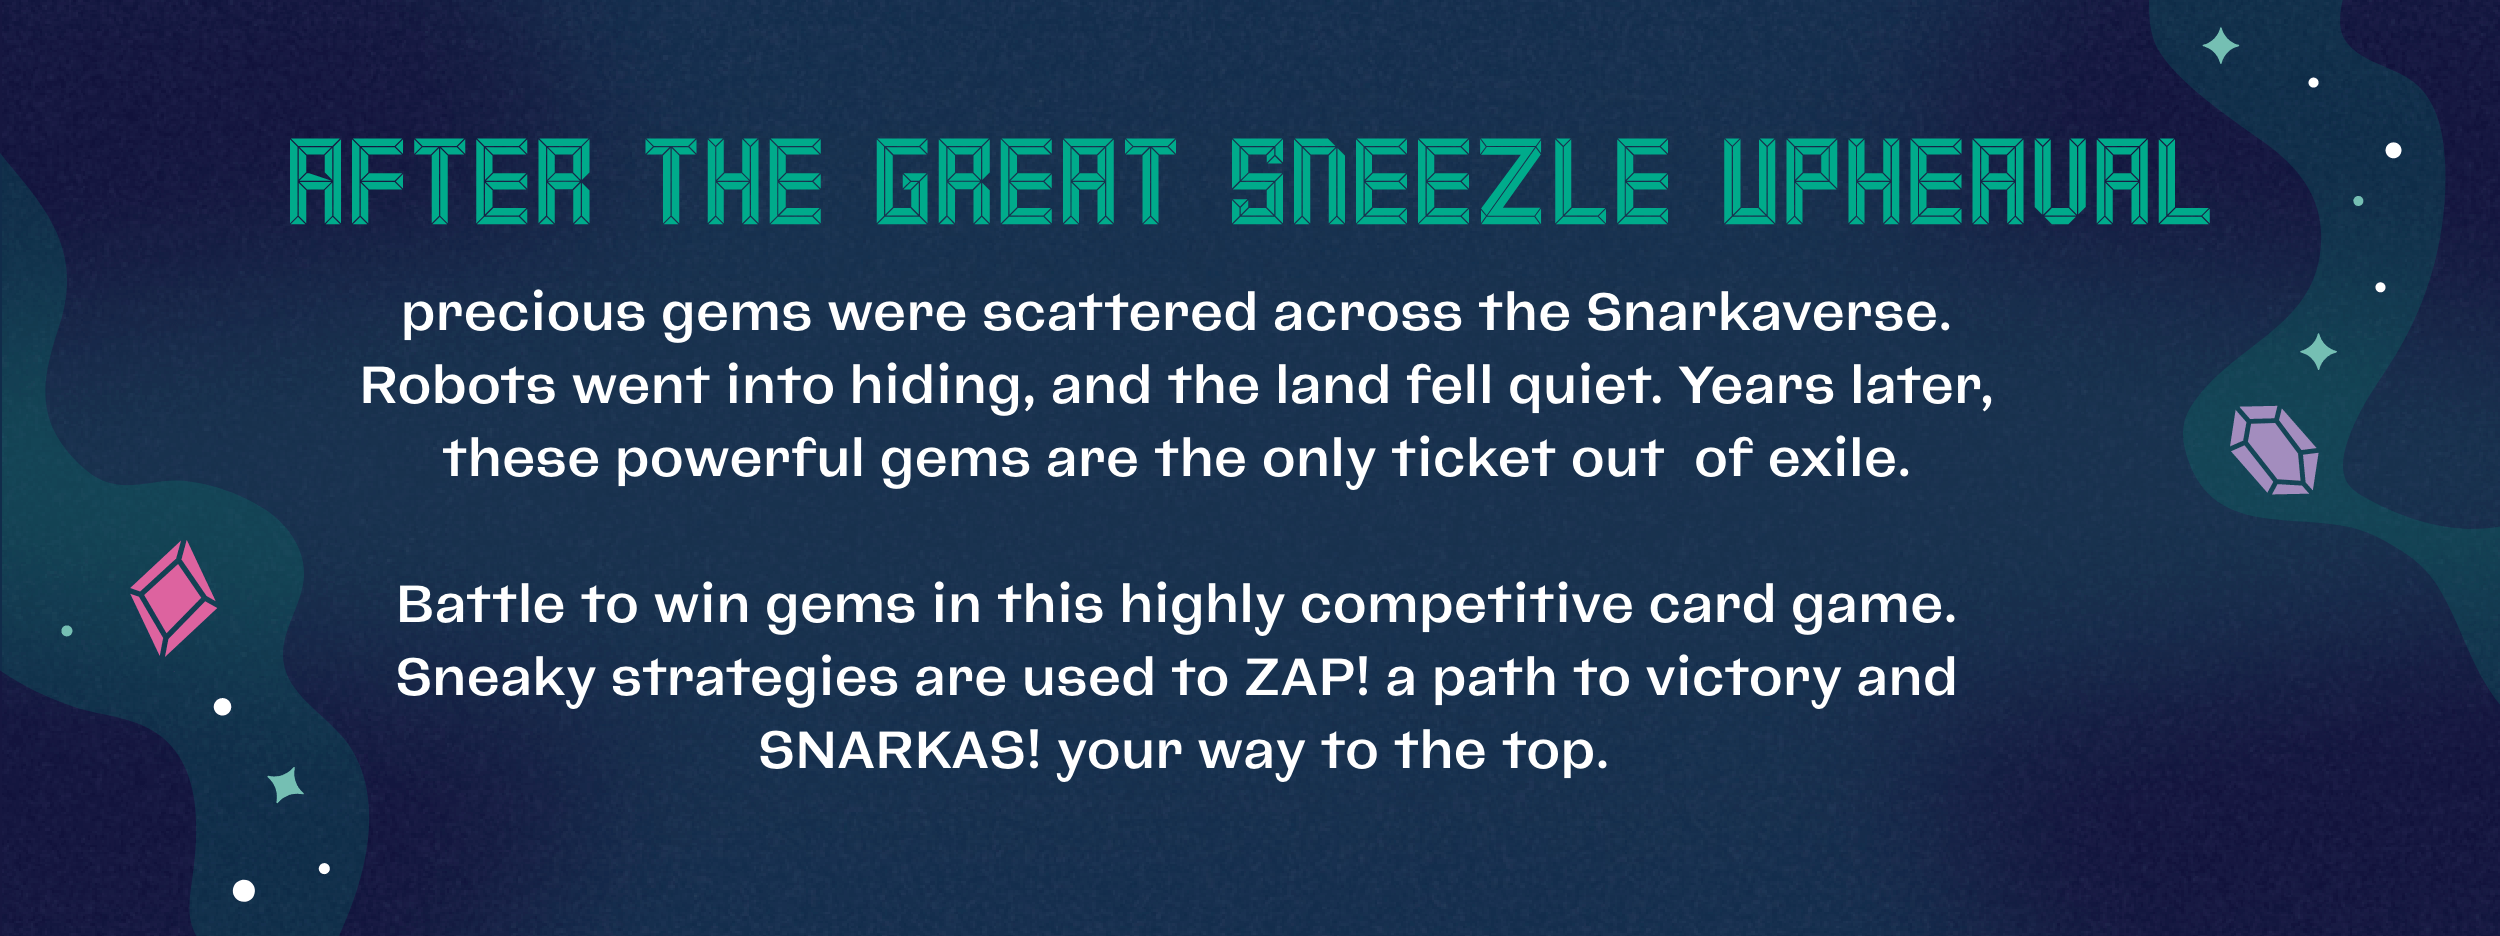 Snarkas game backstory developed by ST8MNT along with package design that reads 